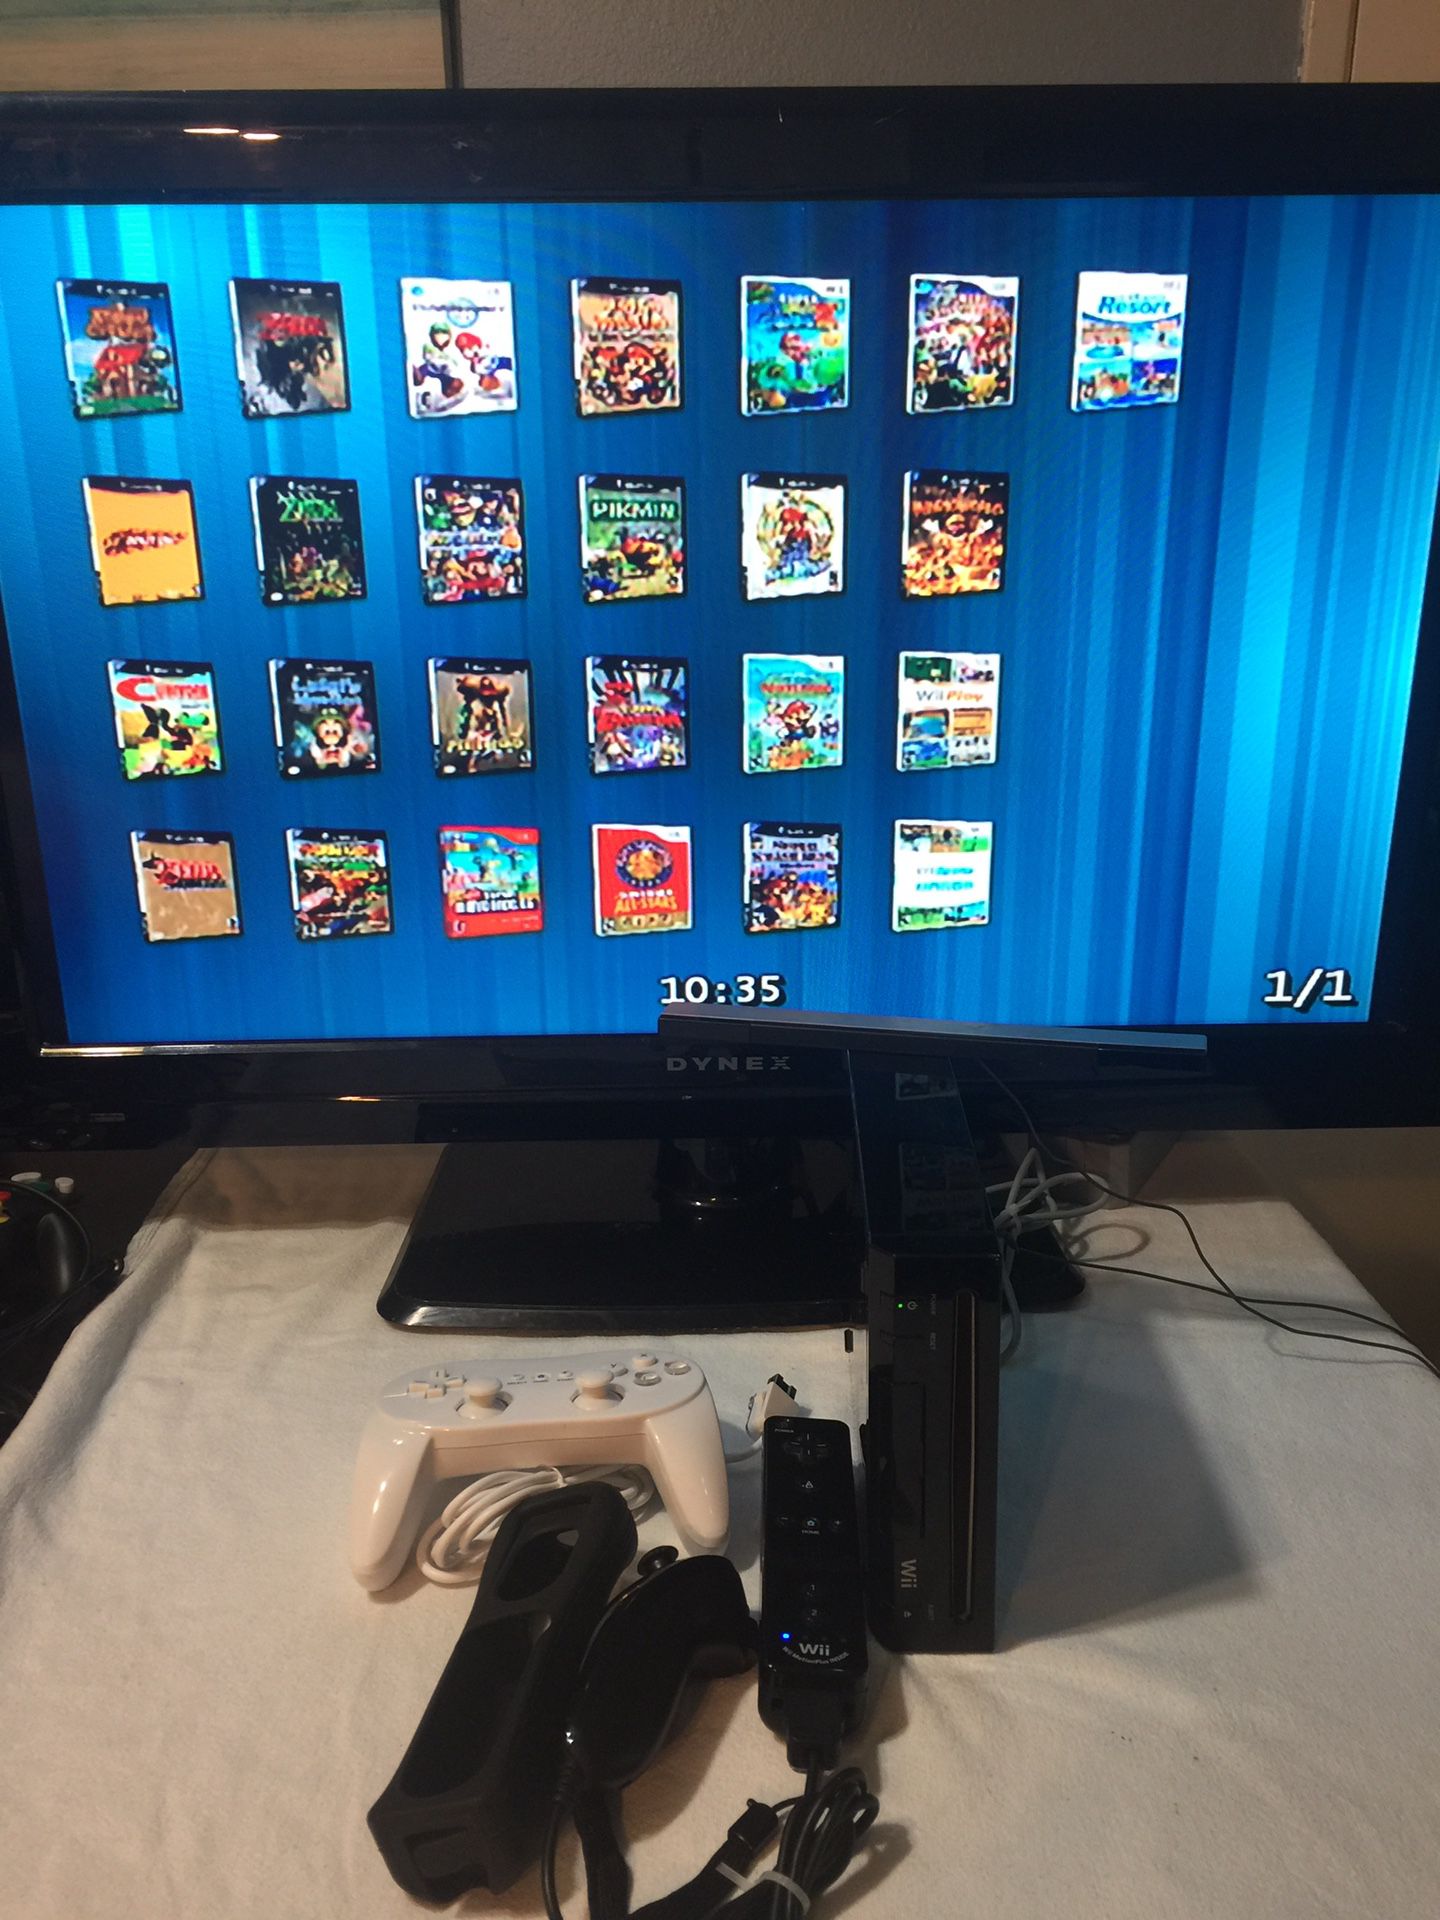 Wii loaded with games